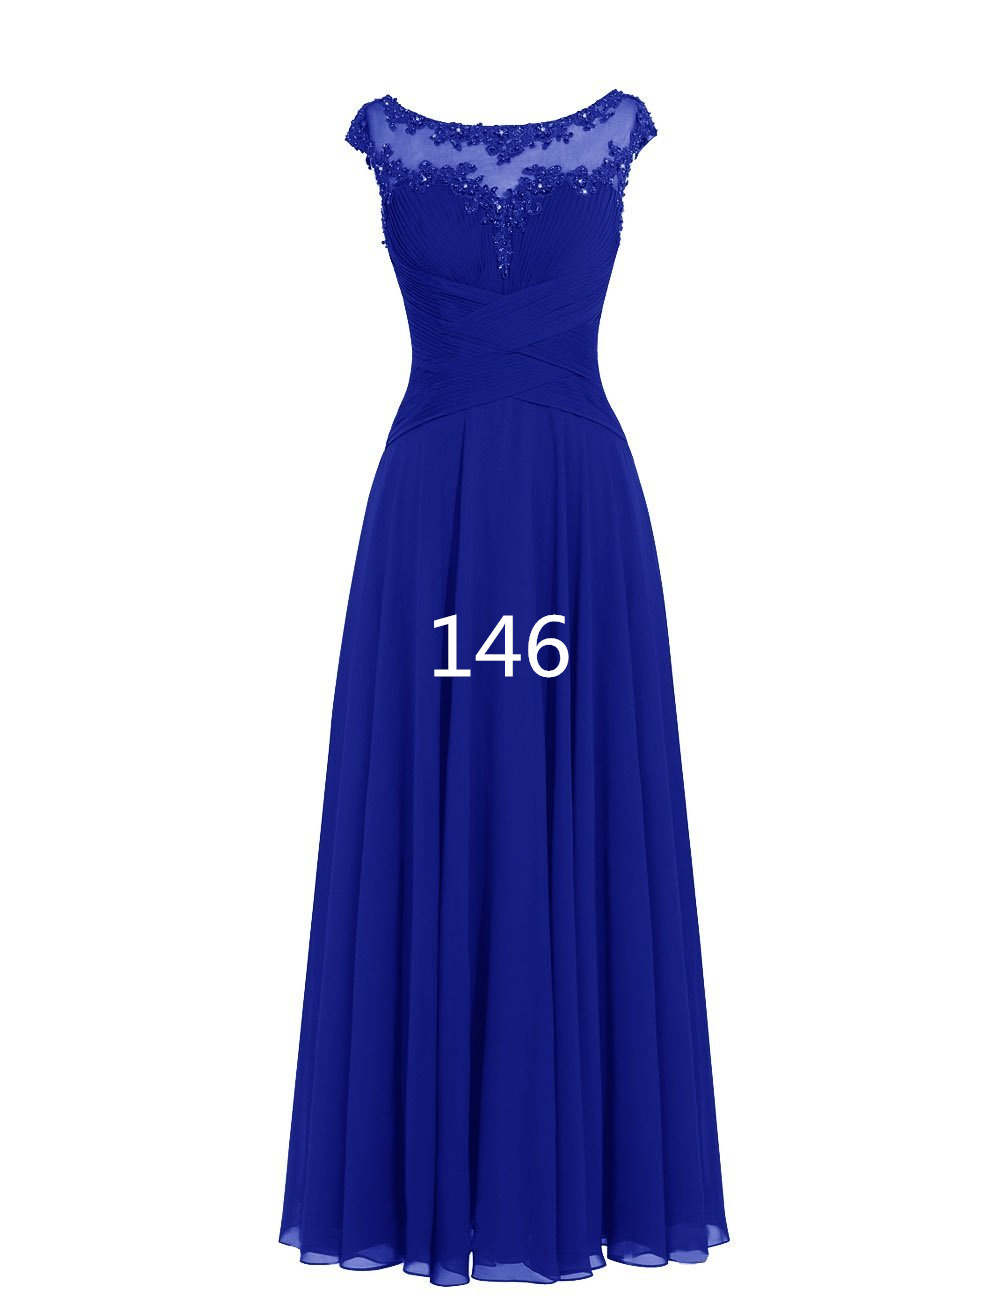 Women Sleveless Embroidered Chiffon Bridesmaid Dress Long Party Pageant Wedding Formal Dress - Blue